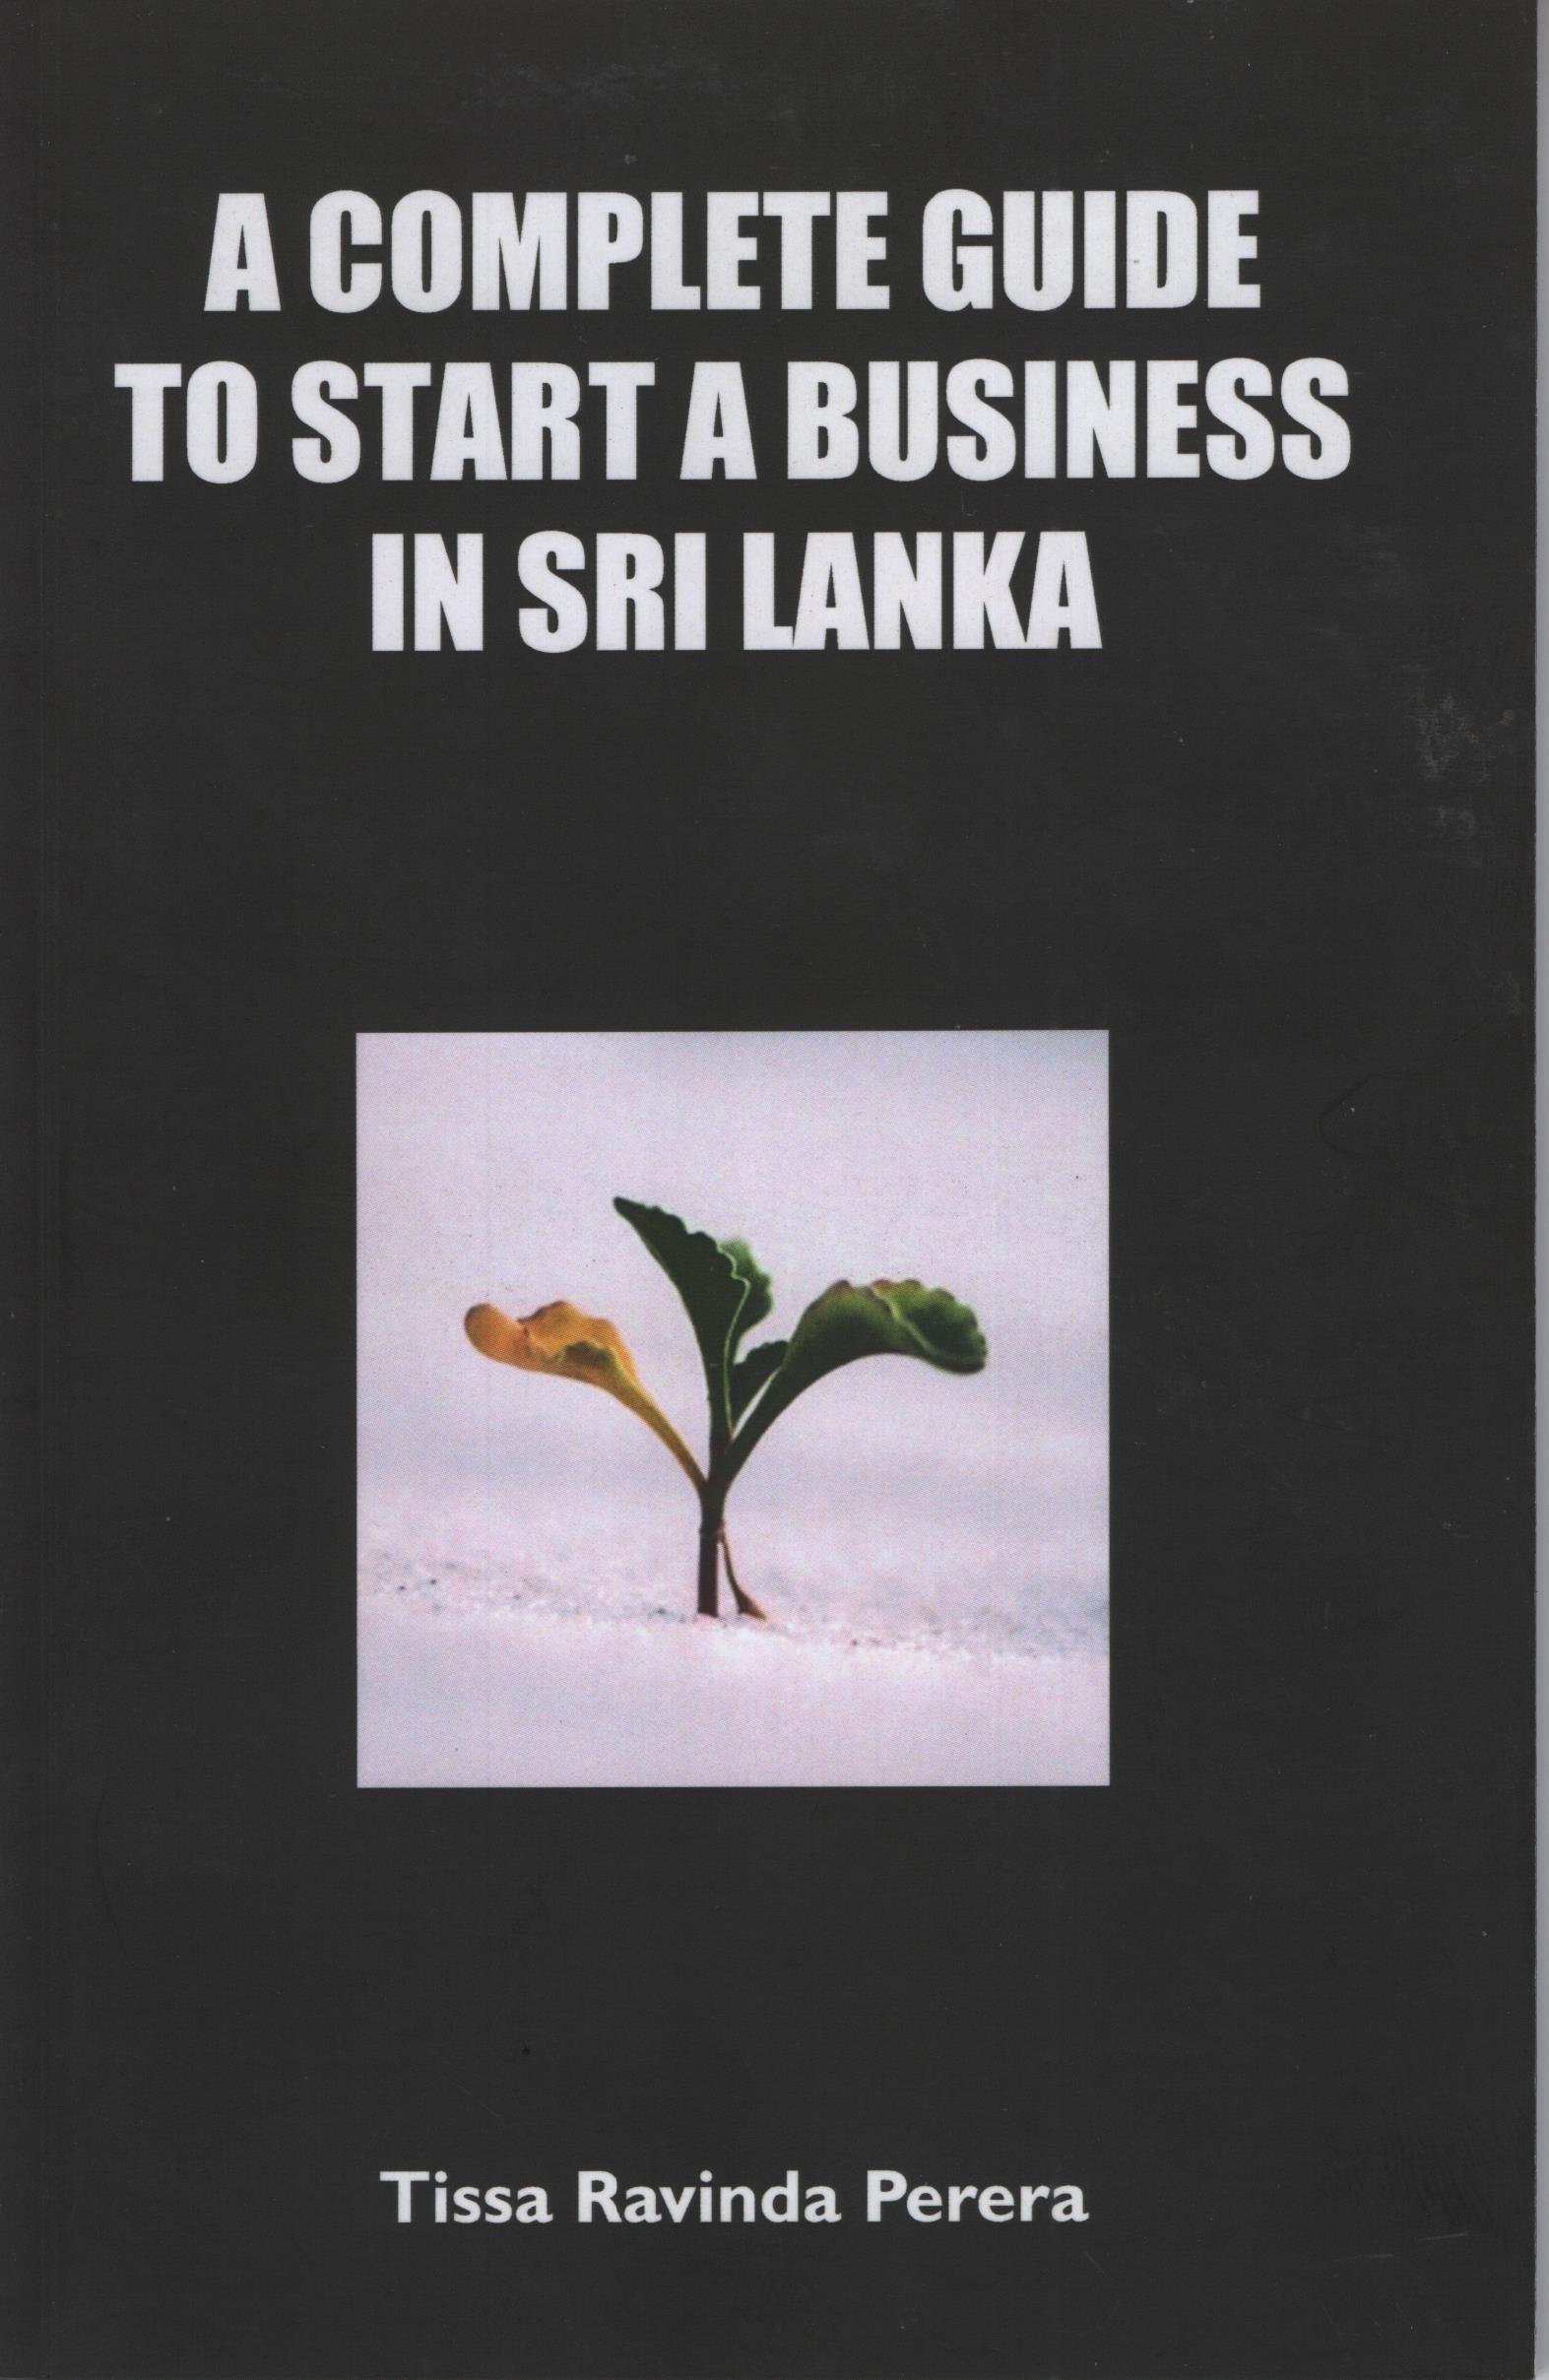 A Complete Guide To Start a Business In Sri Lanka